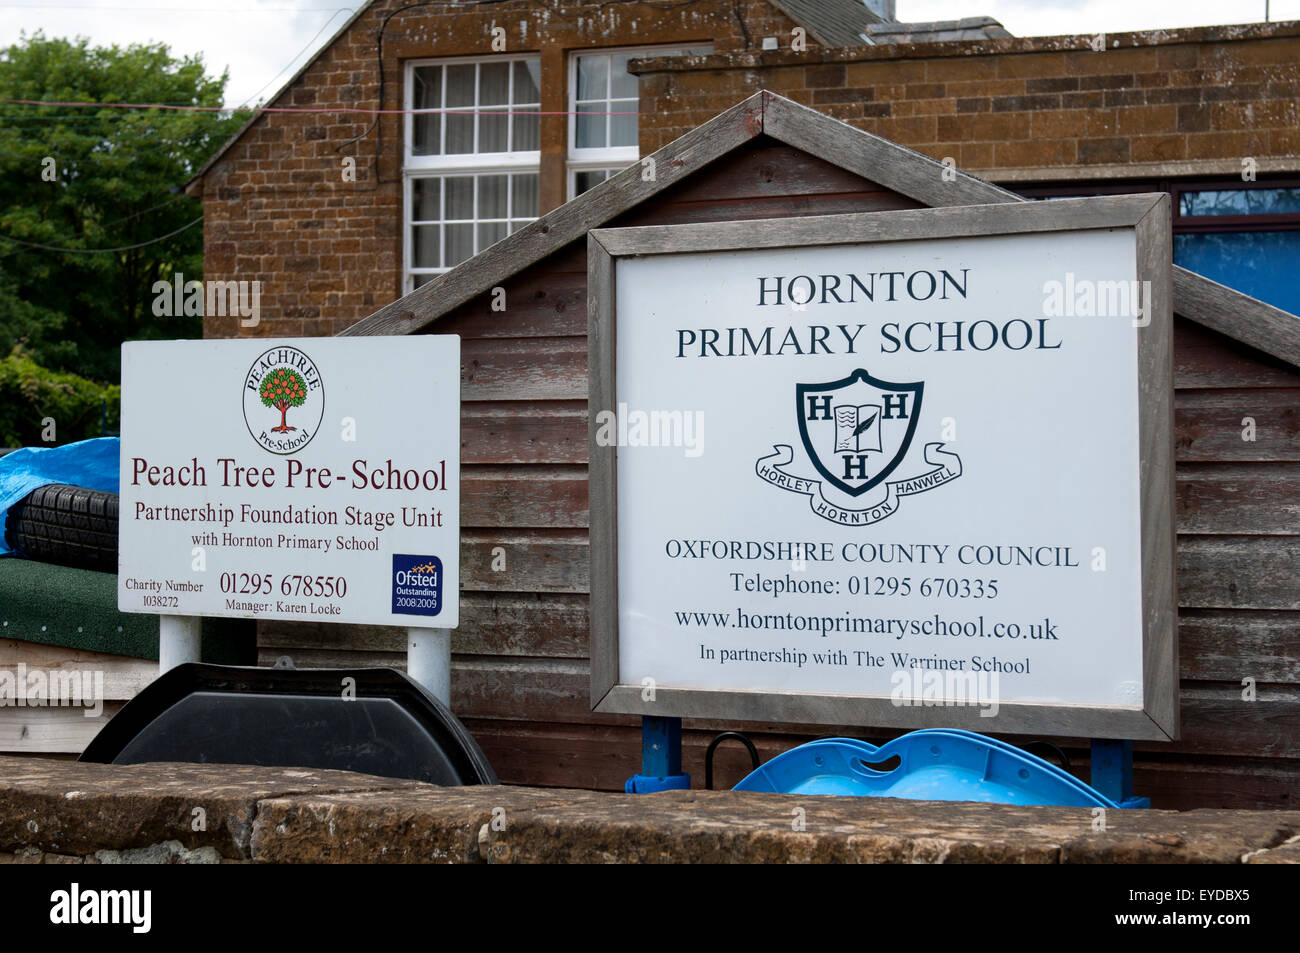 Pre-school and primary school signs, Hornton, Oxfordshire, England, UK Stock Photo